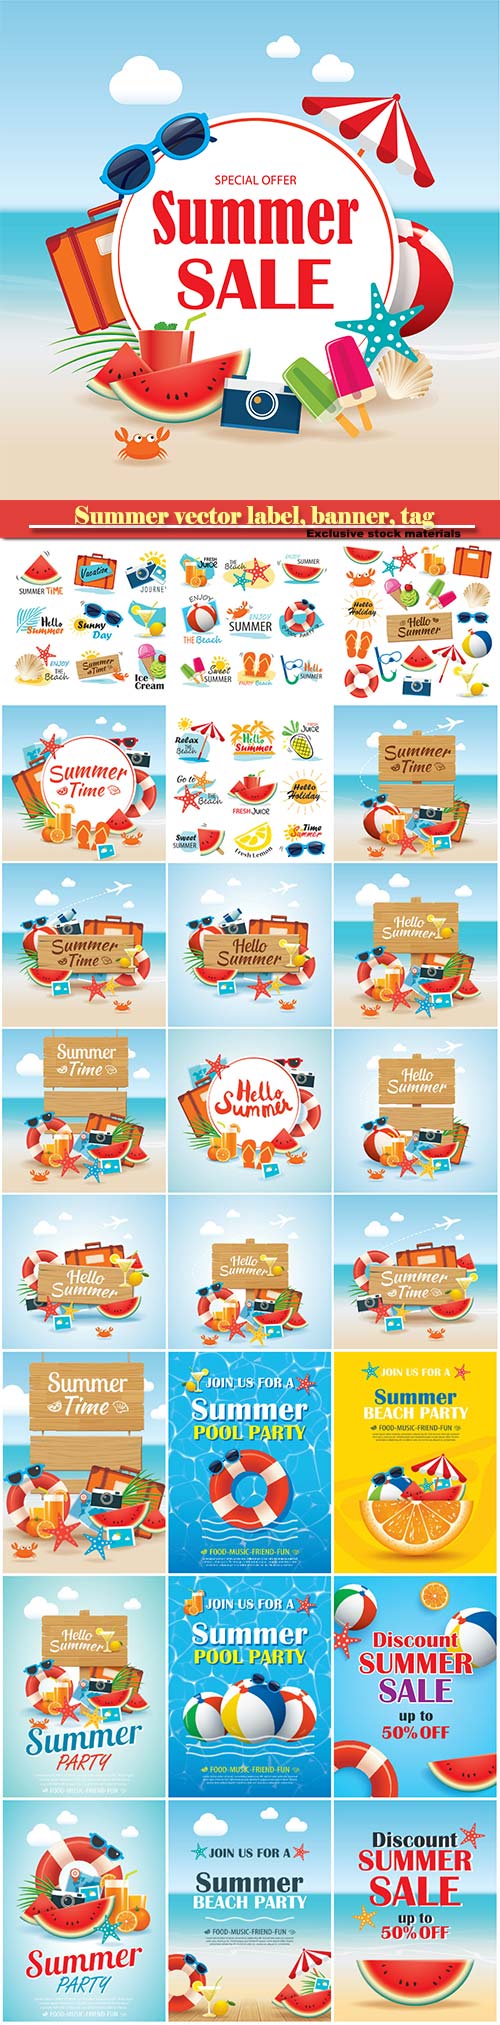 Summer vector label, banner, tag and elements background set